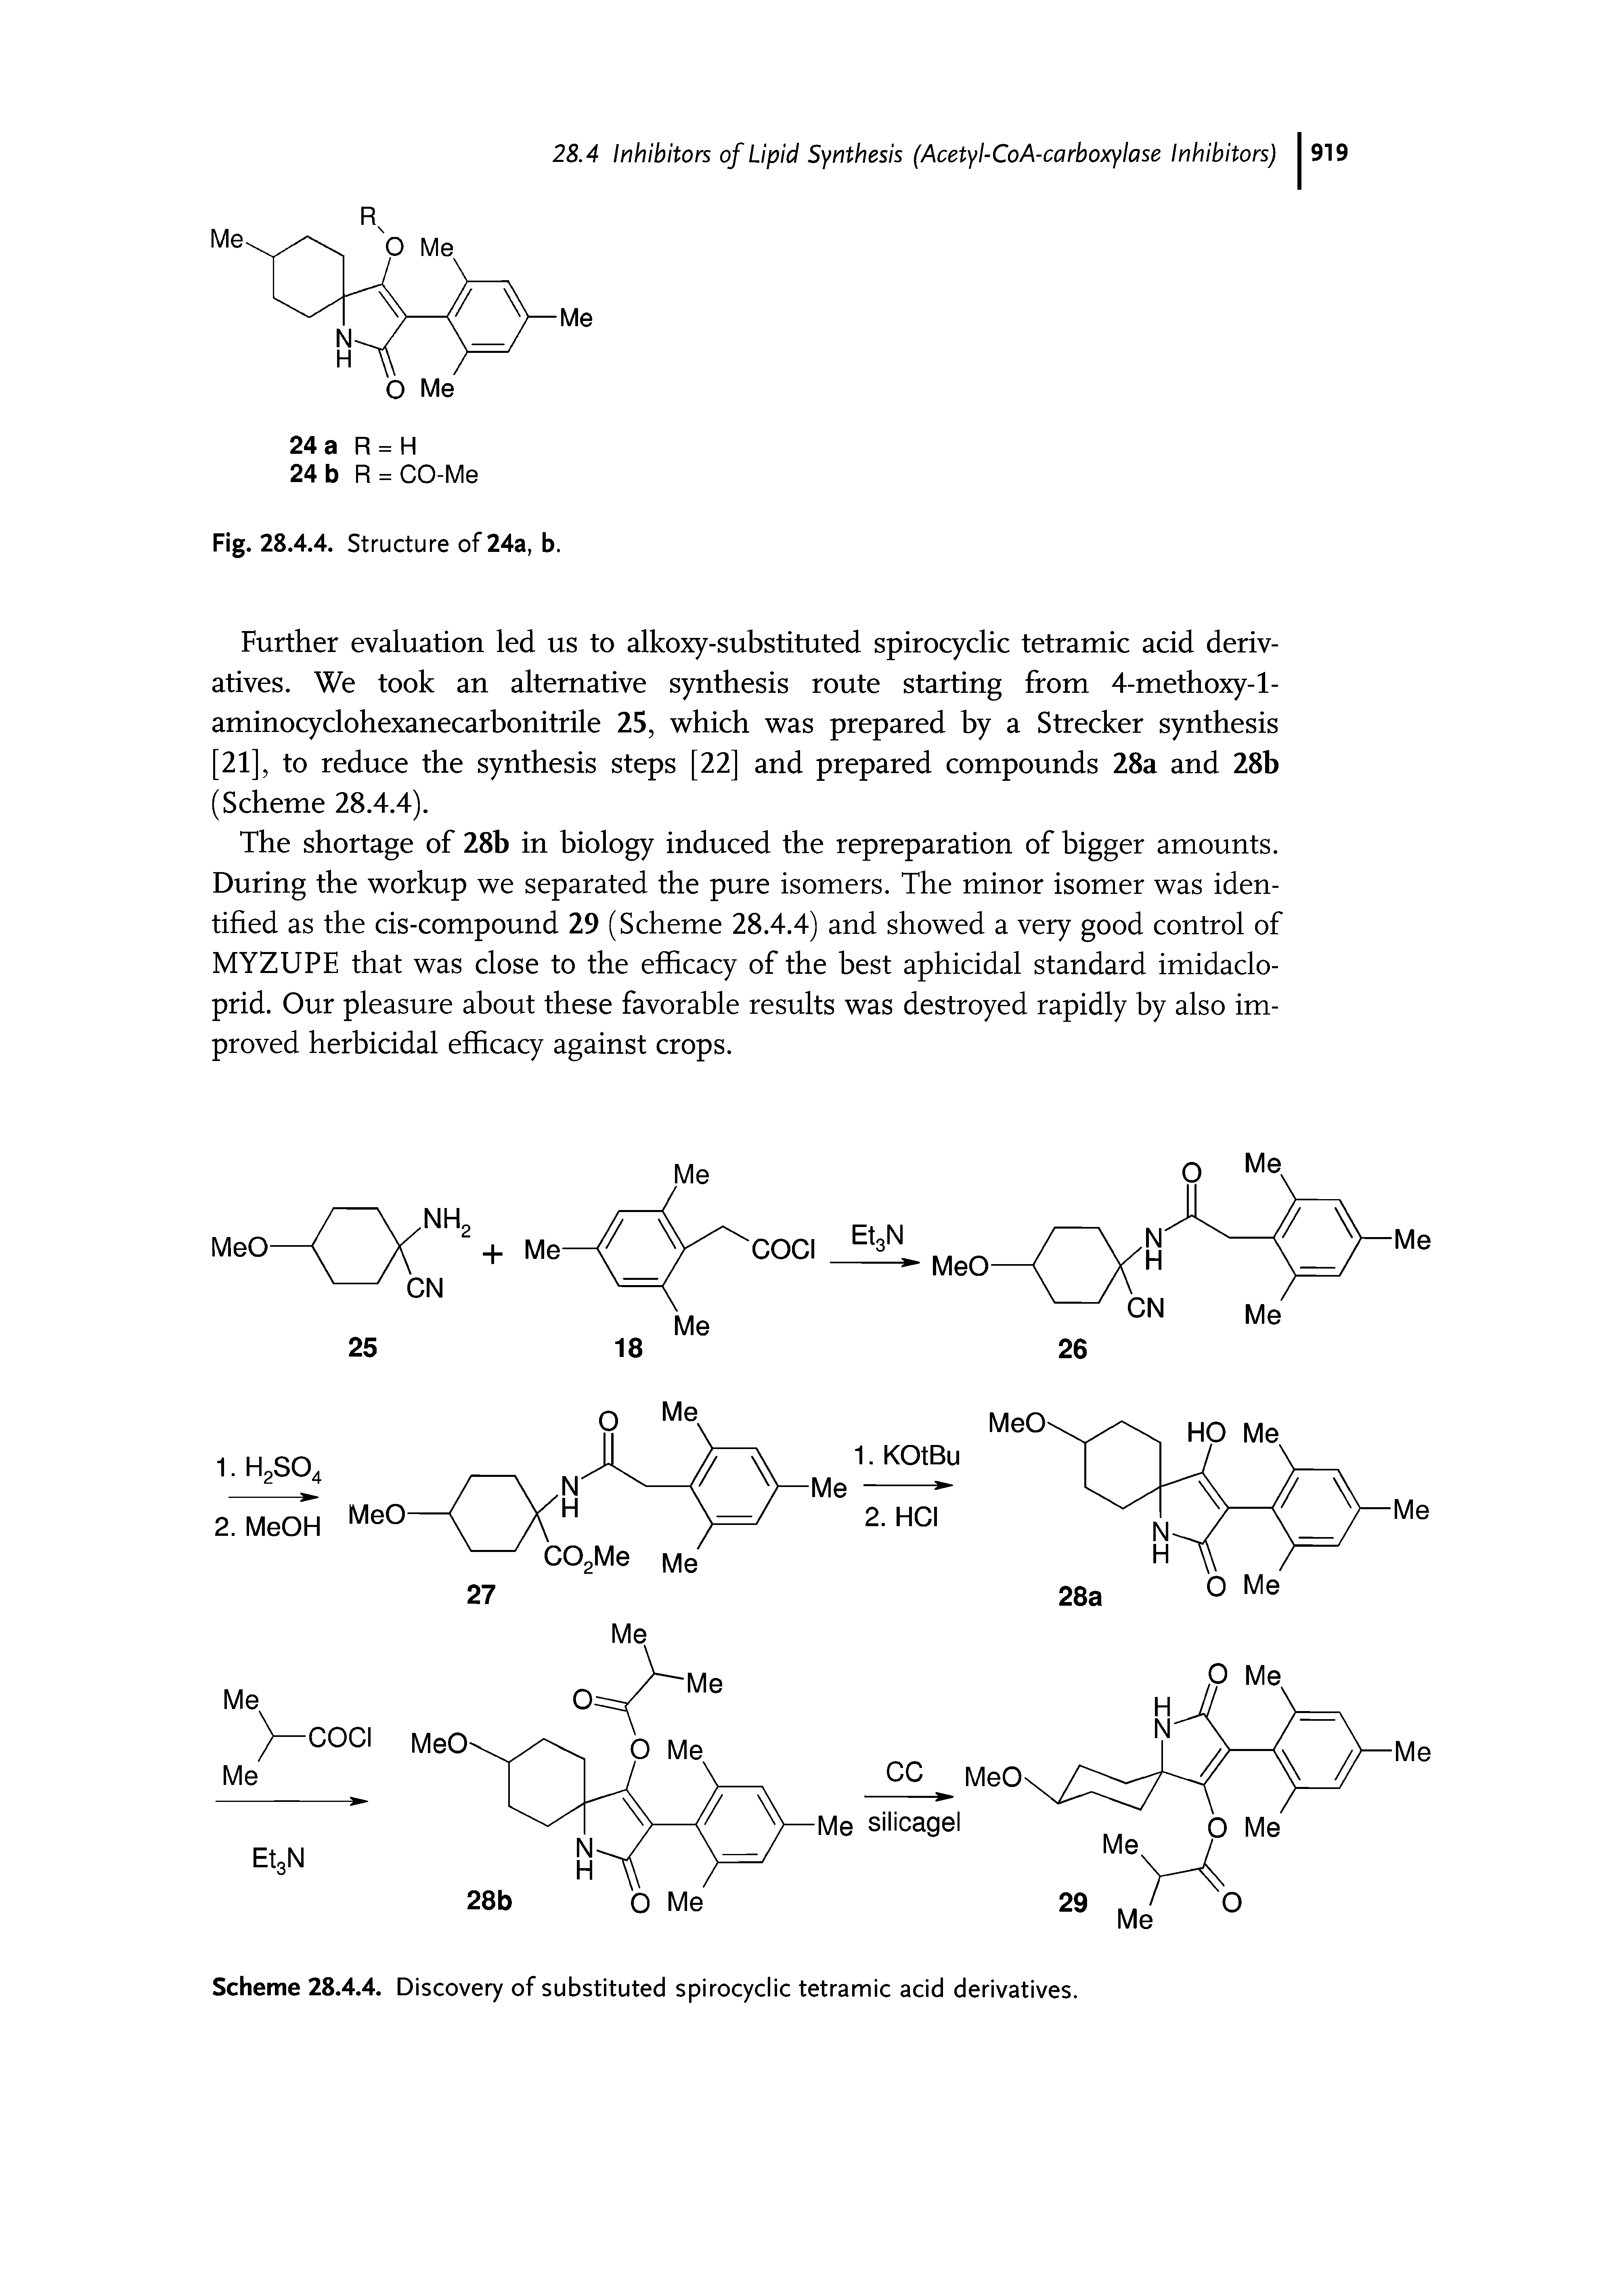 Scheme 28.4.4. Discovery of substituted spirocyclic tetramic acid derivatives.